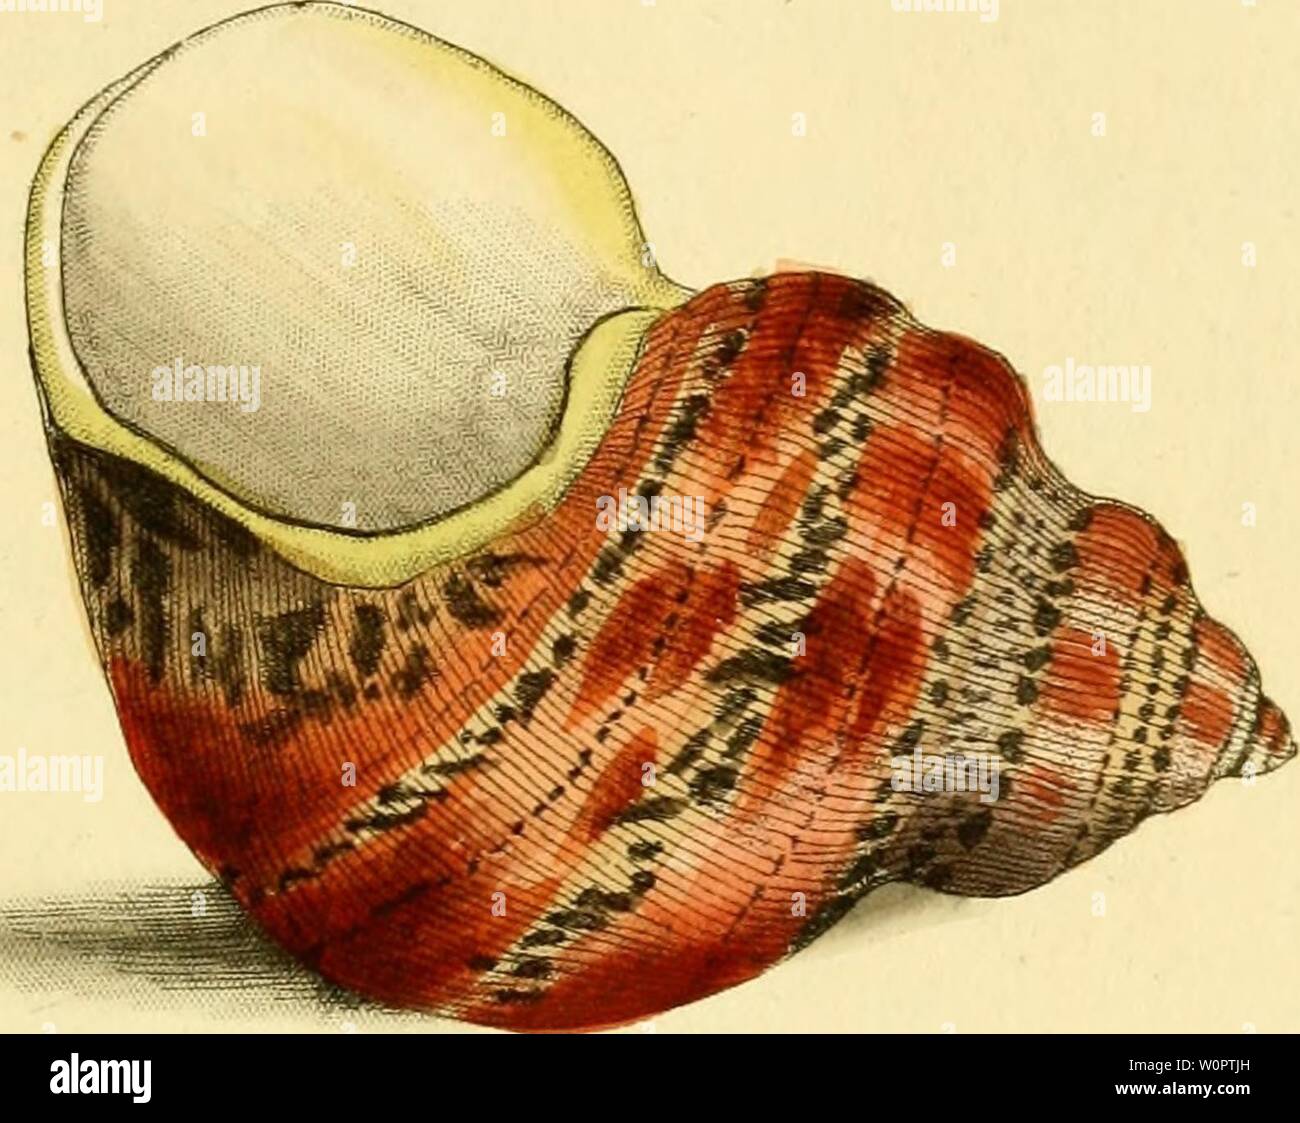 Archive image from page 136 of [Descriptions and illustrations of mollusks. [Descriptions and illustrations of mollusks : excerpted from The naturalist's miscellany descriptionsillu12shaw Year: 1800  3Jt). Stock Photo